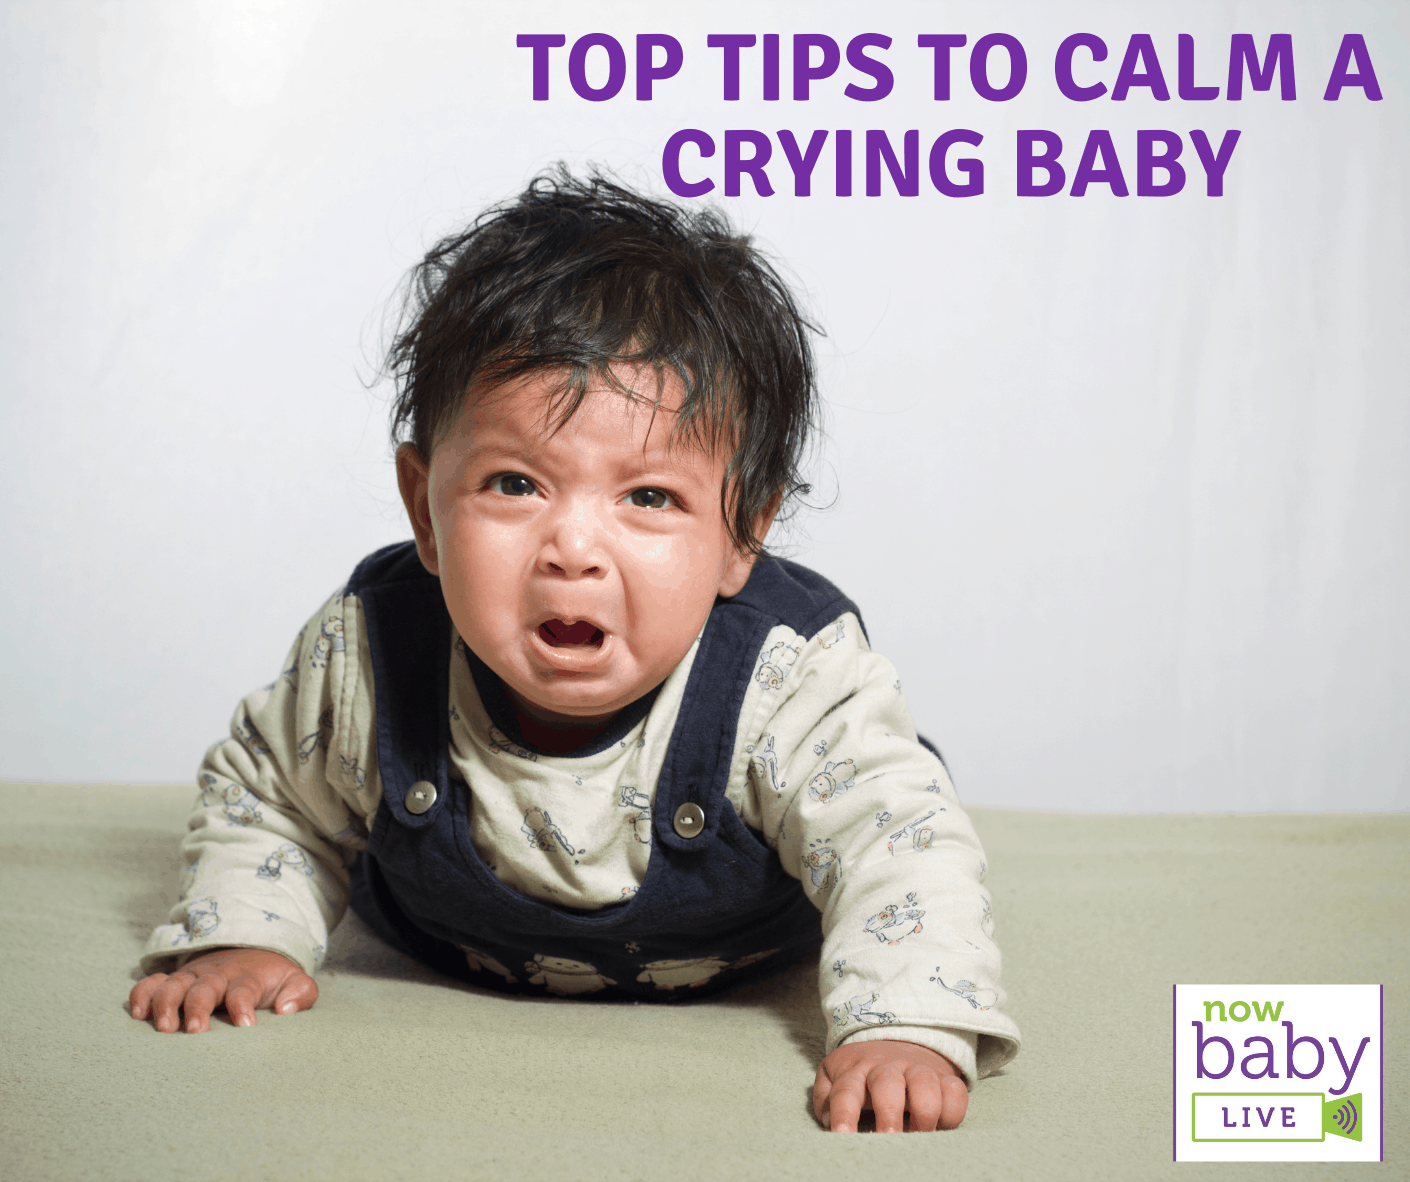 Top tips to calm a crying baby